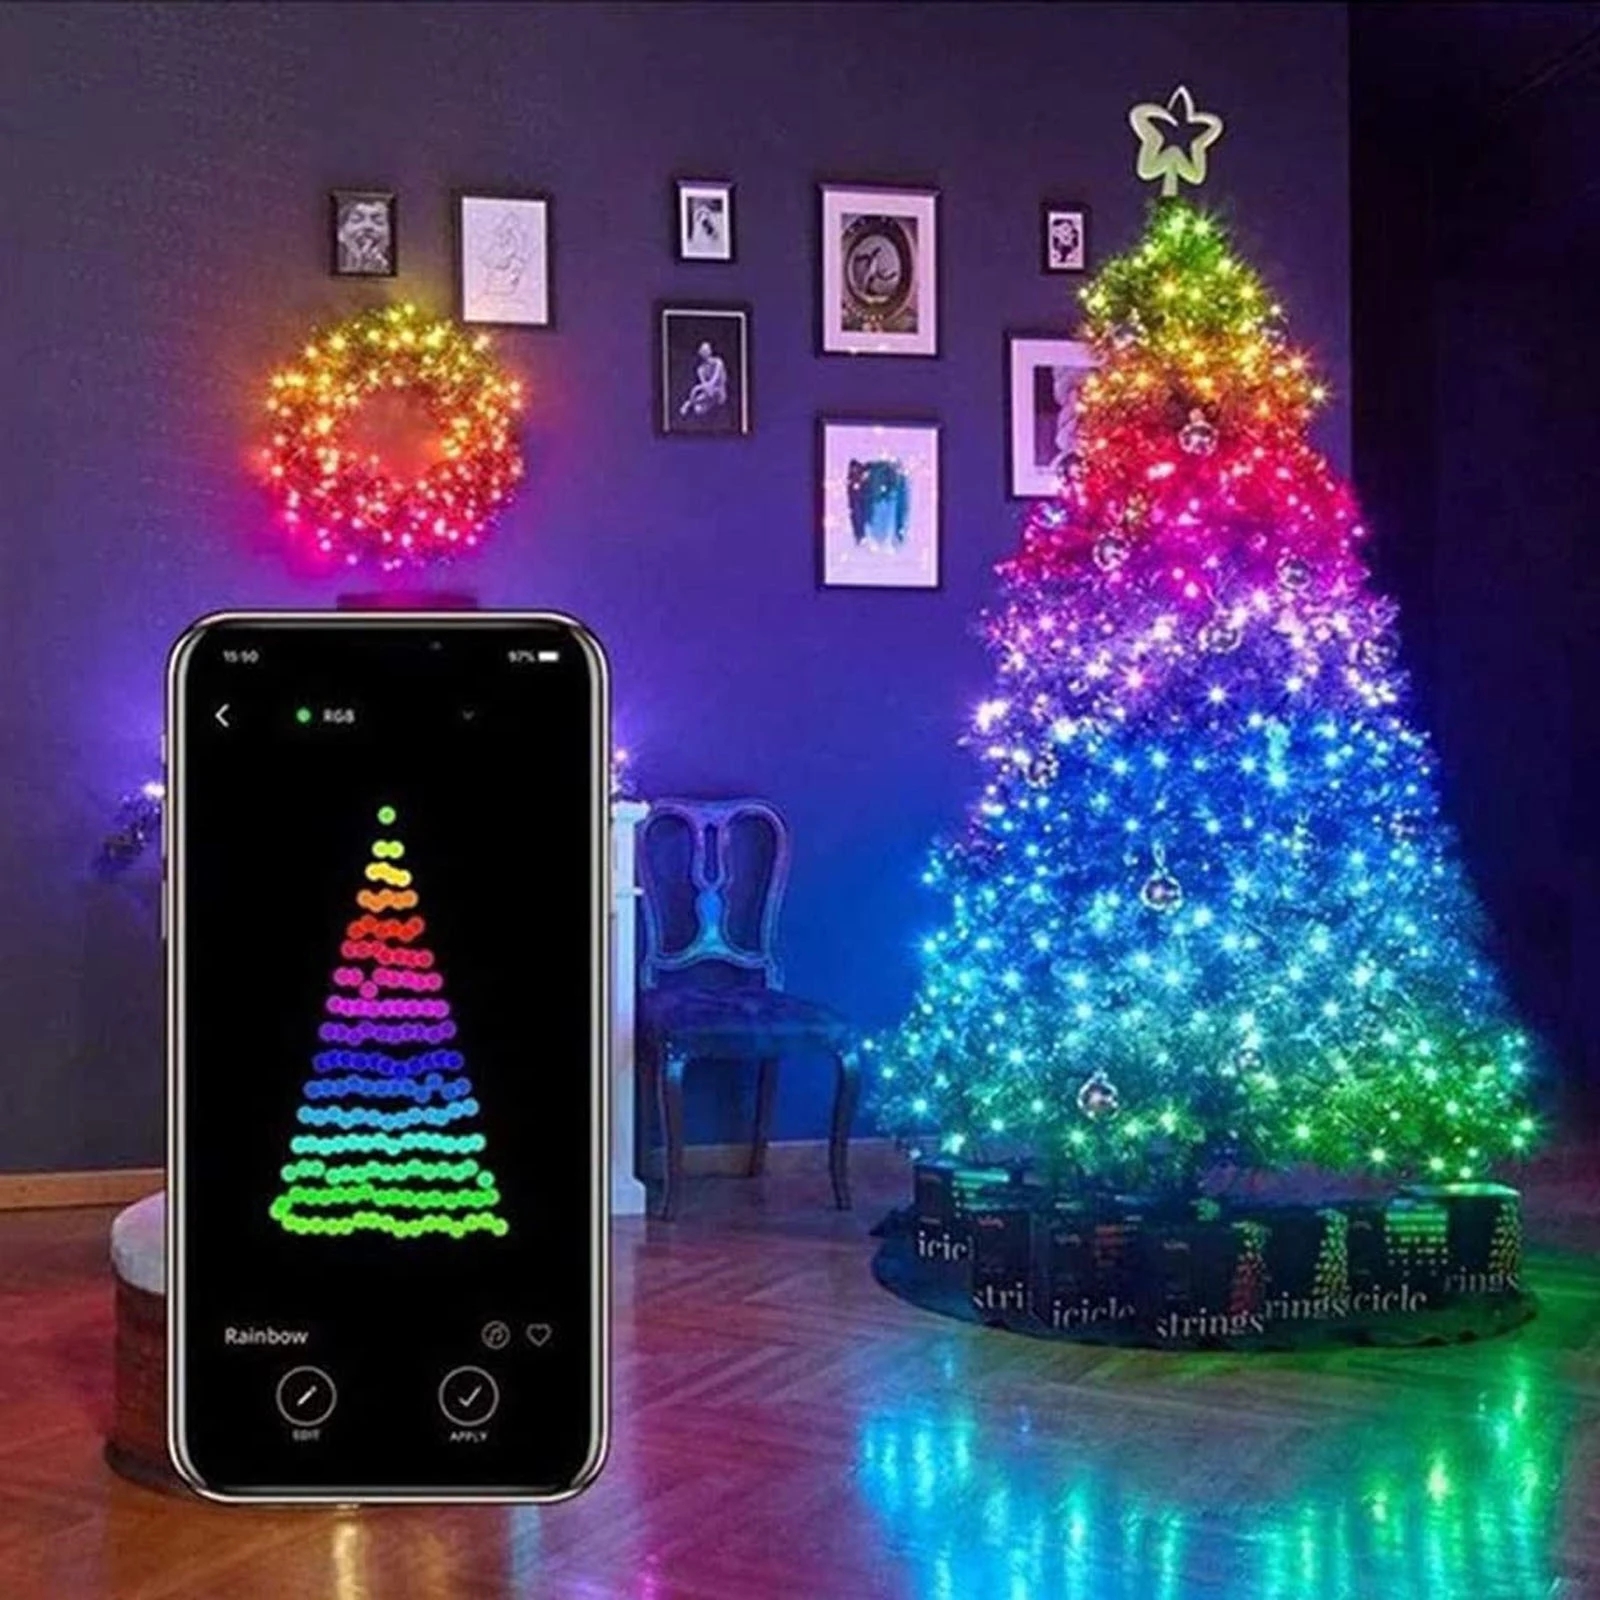 10m 50m 12V LED String Fairy Light Wire Christmas Tree Holiday Decorations Lamp 